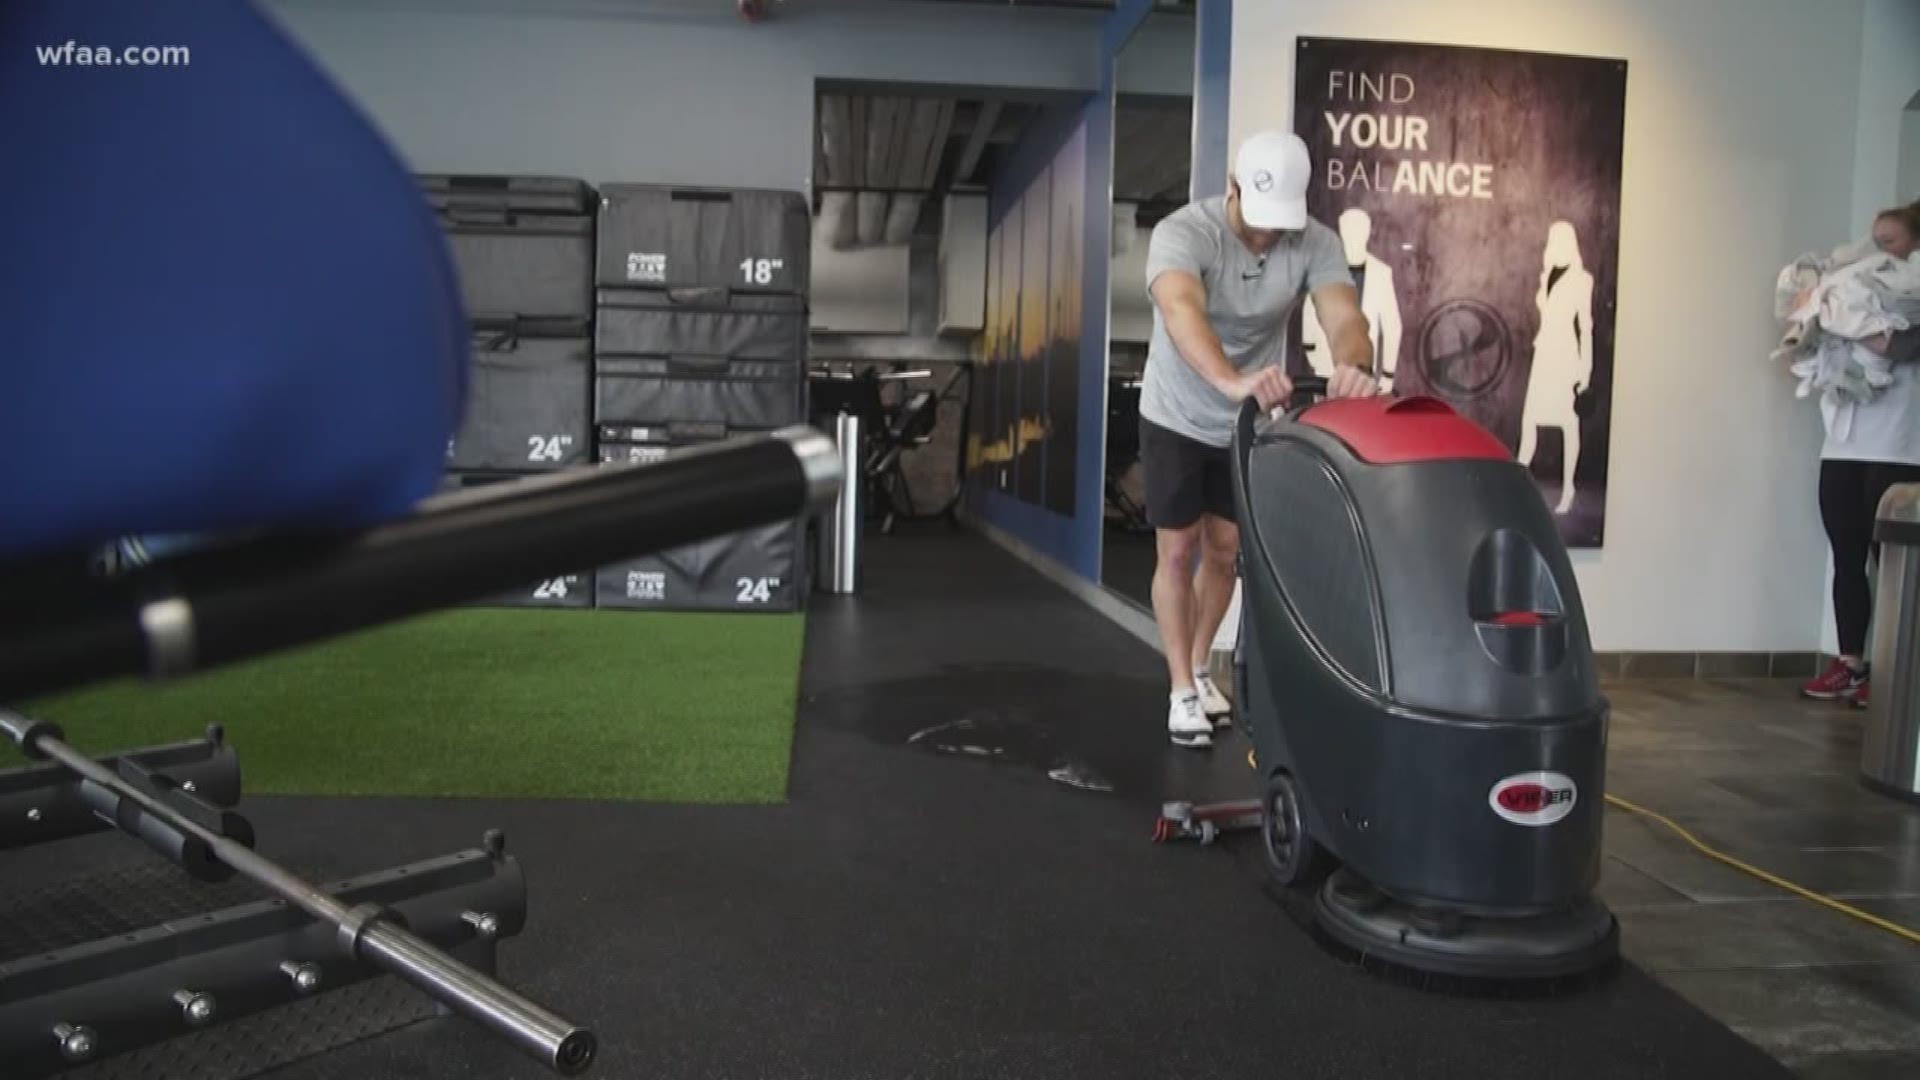 WFAA's Sonia Azad takes a look at how local fitness studios are ensuring their spaces are clean and containing the spread of germs.